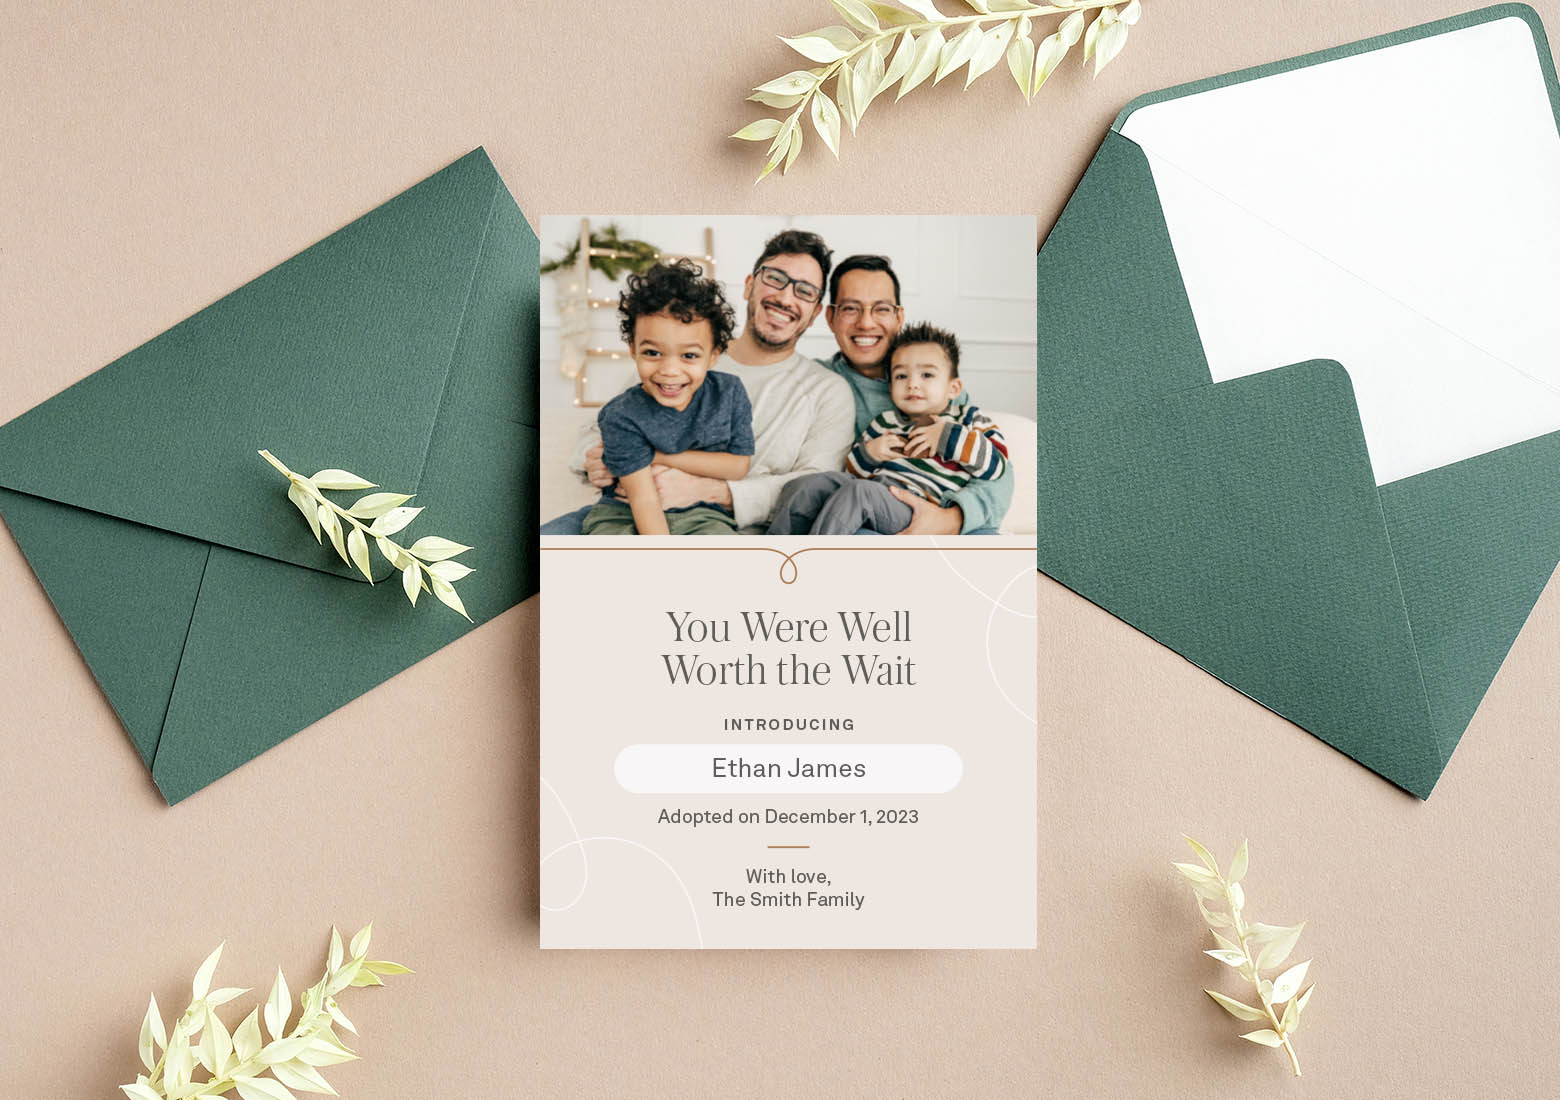 Green envelopes on table with an adoption announcement over top that says you were well worth the wait